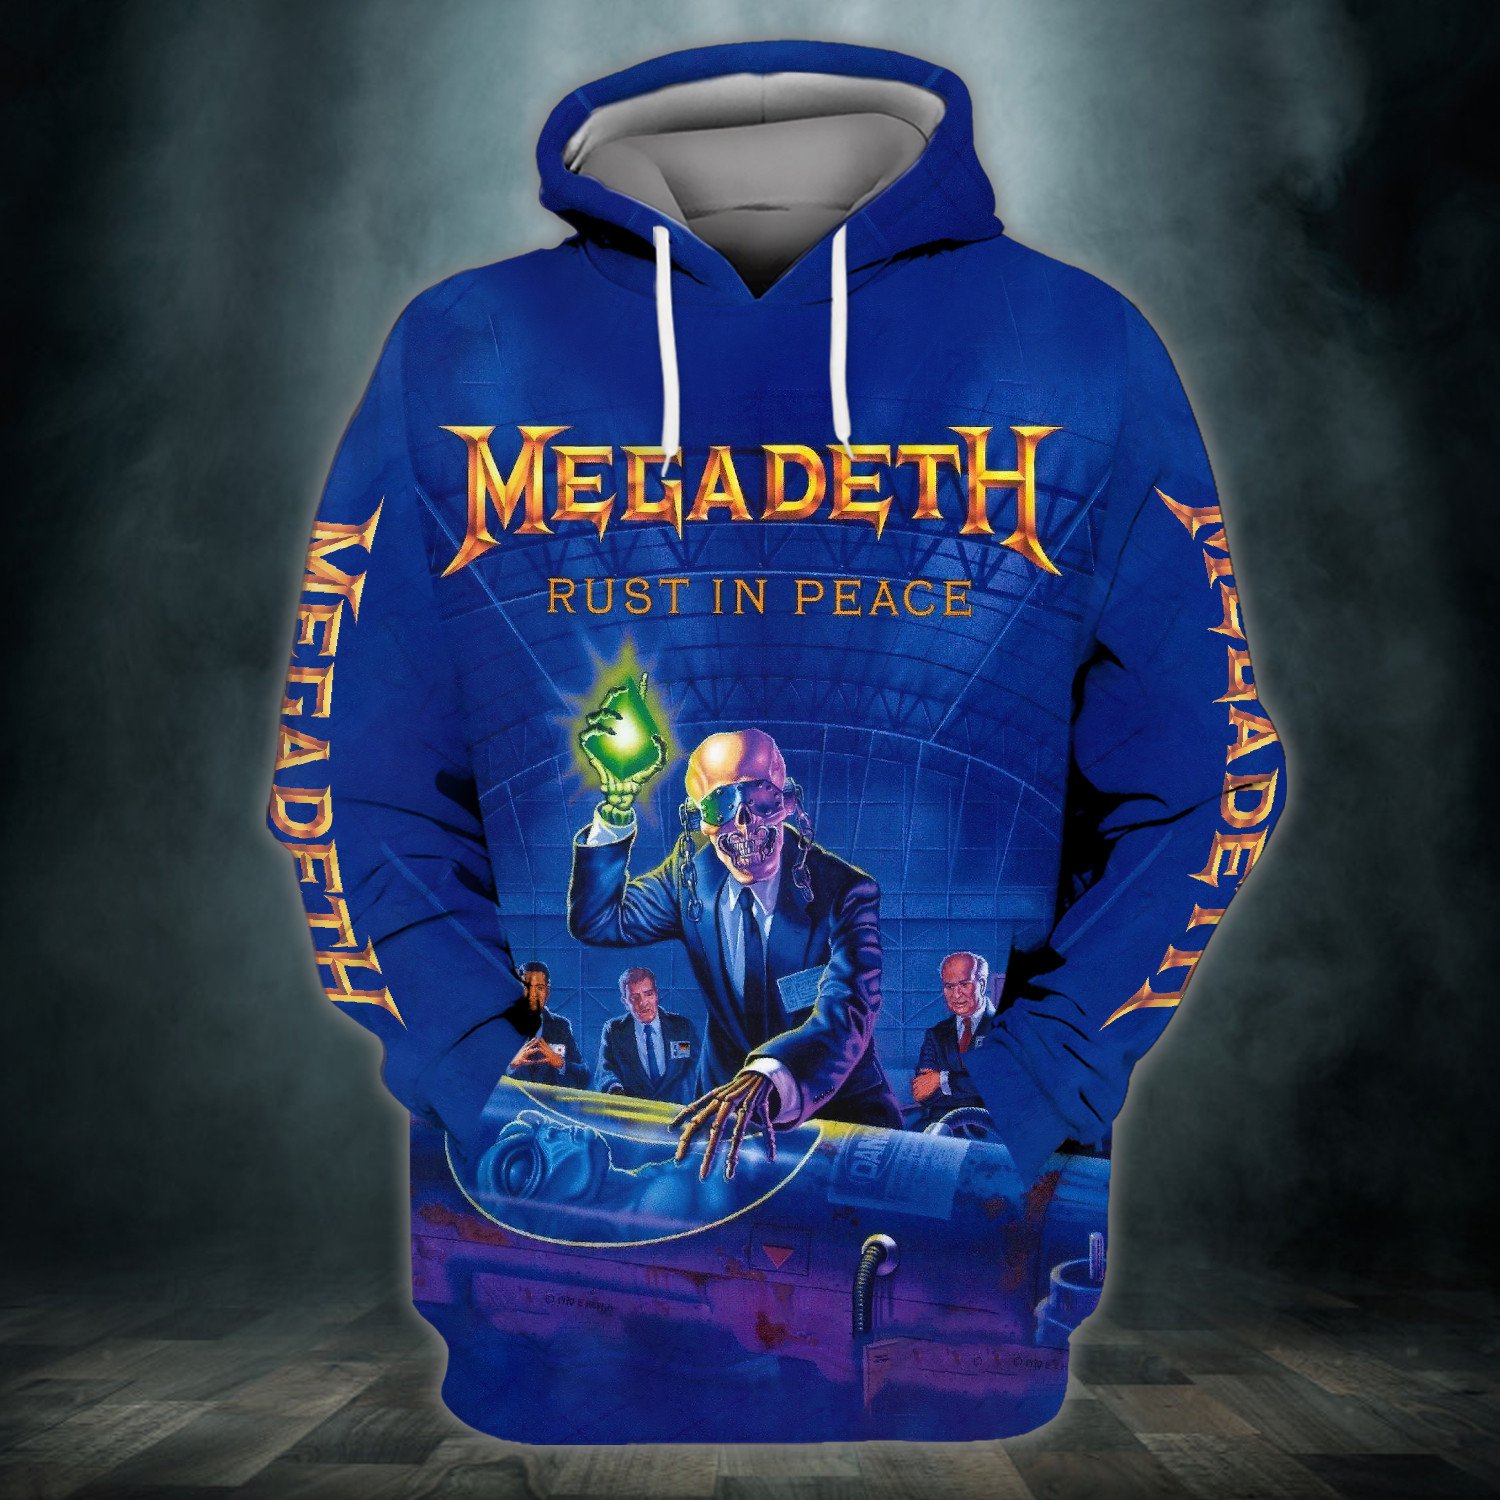 rush in peace megadeth shirt 4987 Y7JTo